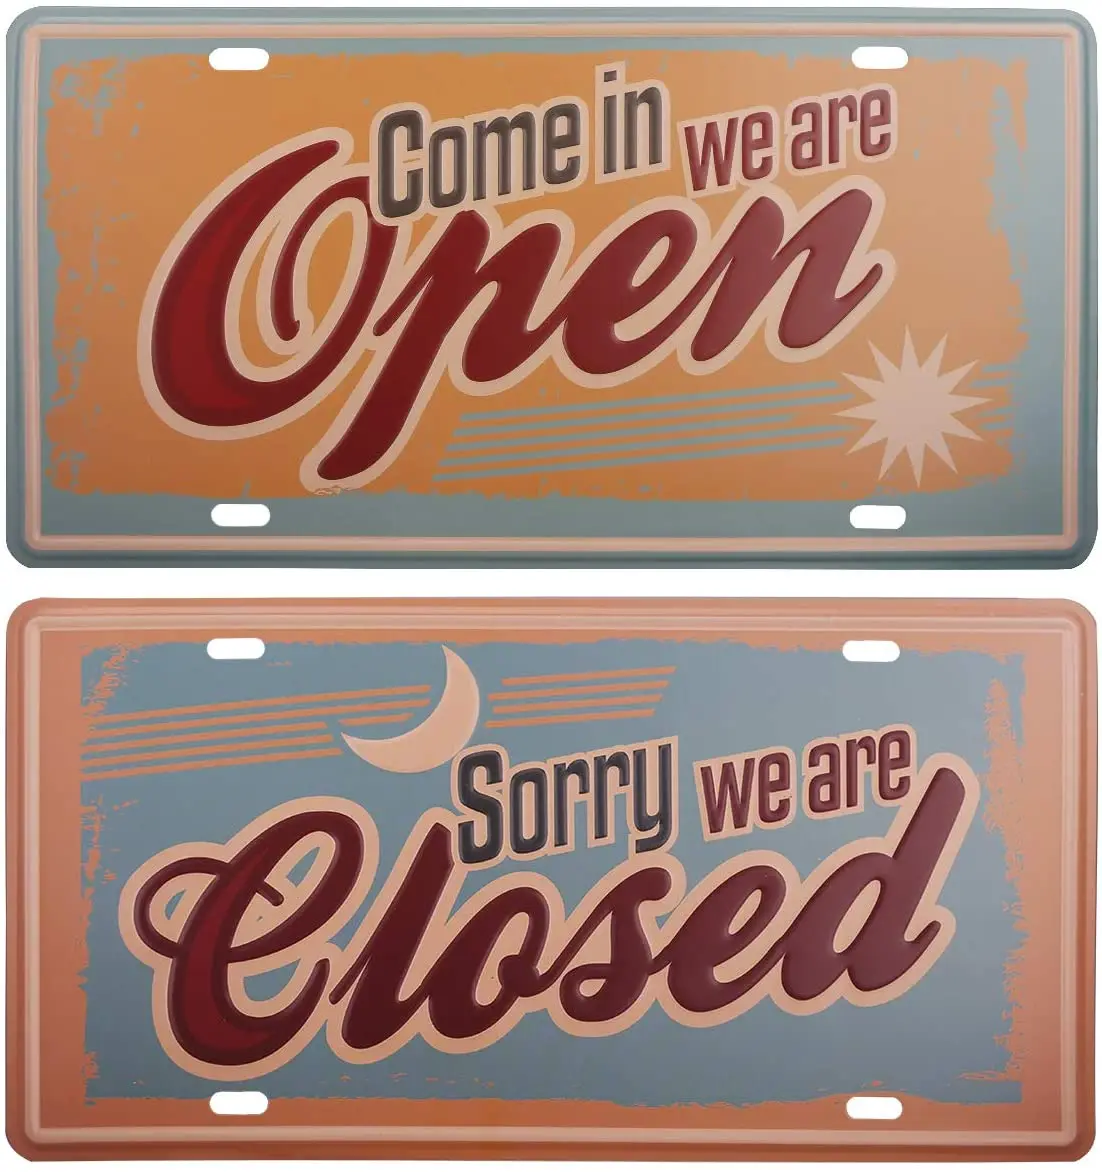 

HANTAJANSS Open Closed License Plate Metal Sign 2 Pack, Retro Vintage Tin Signs for Car Plate Cover, Garage, Pub, Restaurant